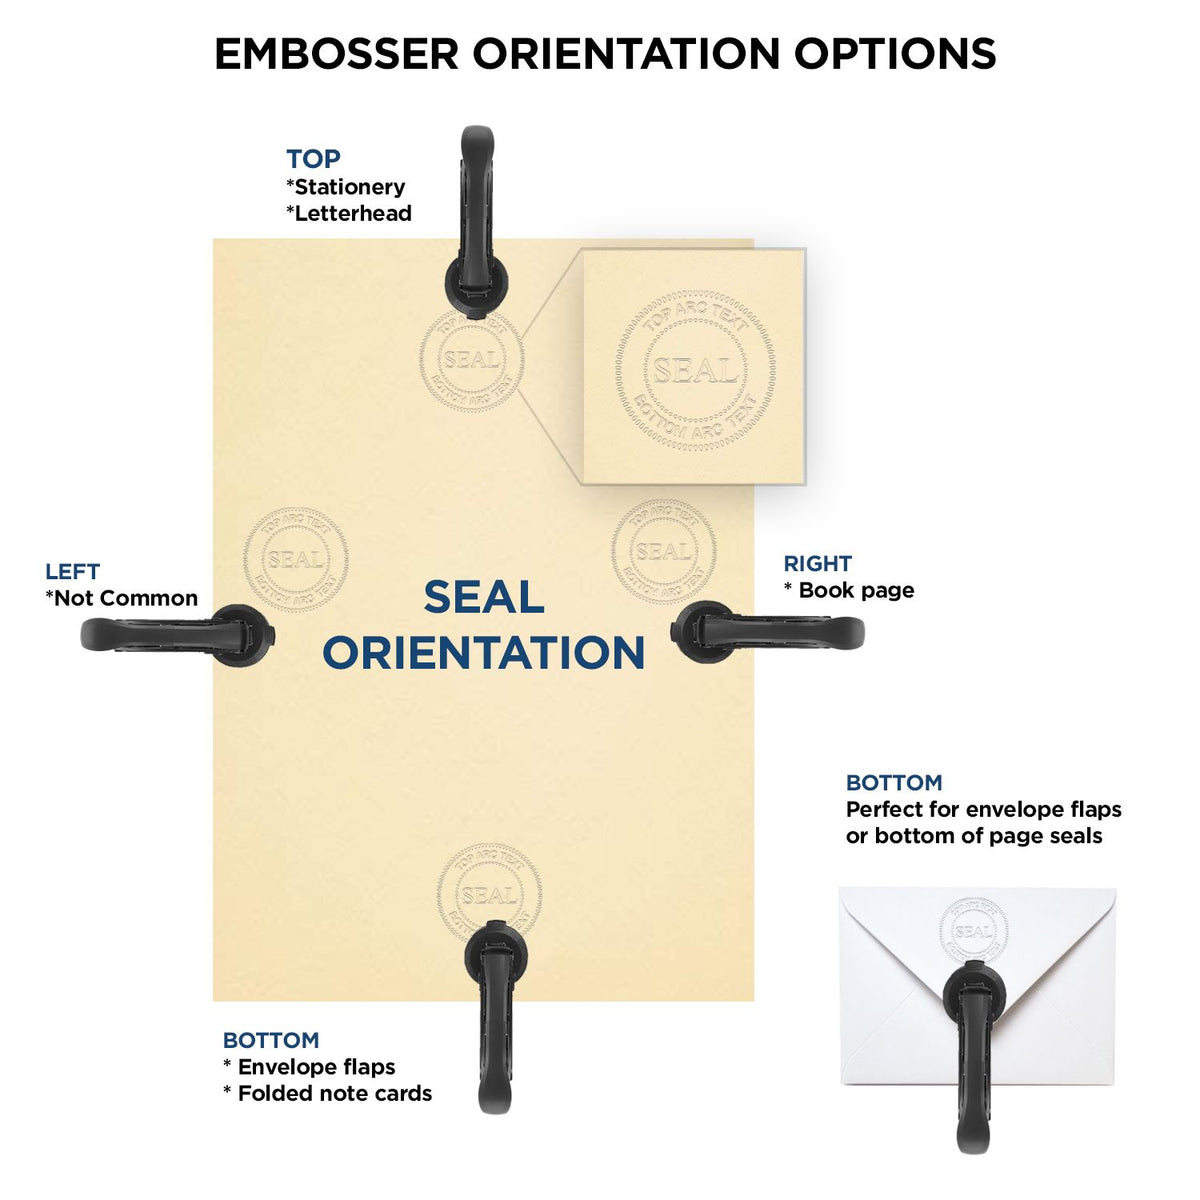 An infographic for the State of Hawaii Long Reach Architectural Embossing Seal showing embosser orientation, this is showing examples of a top, bottom, right and left insert.